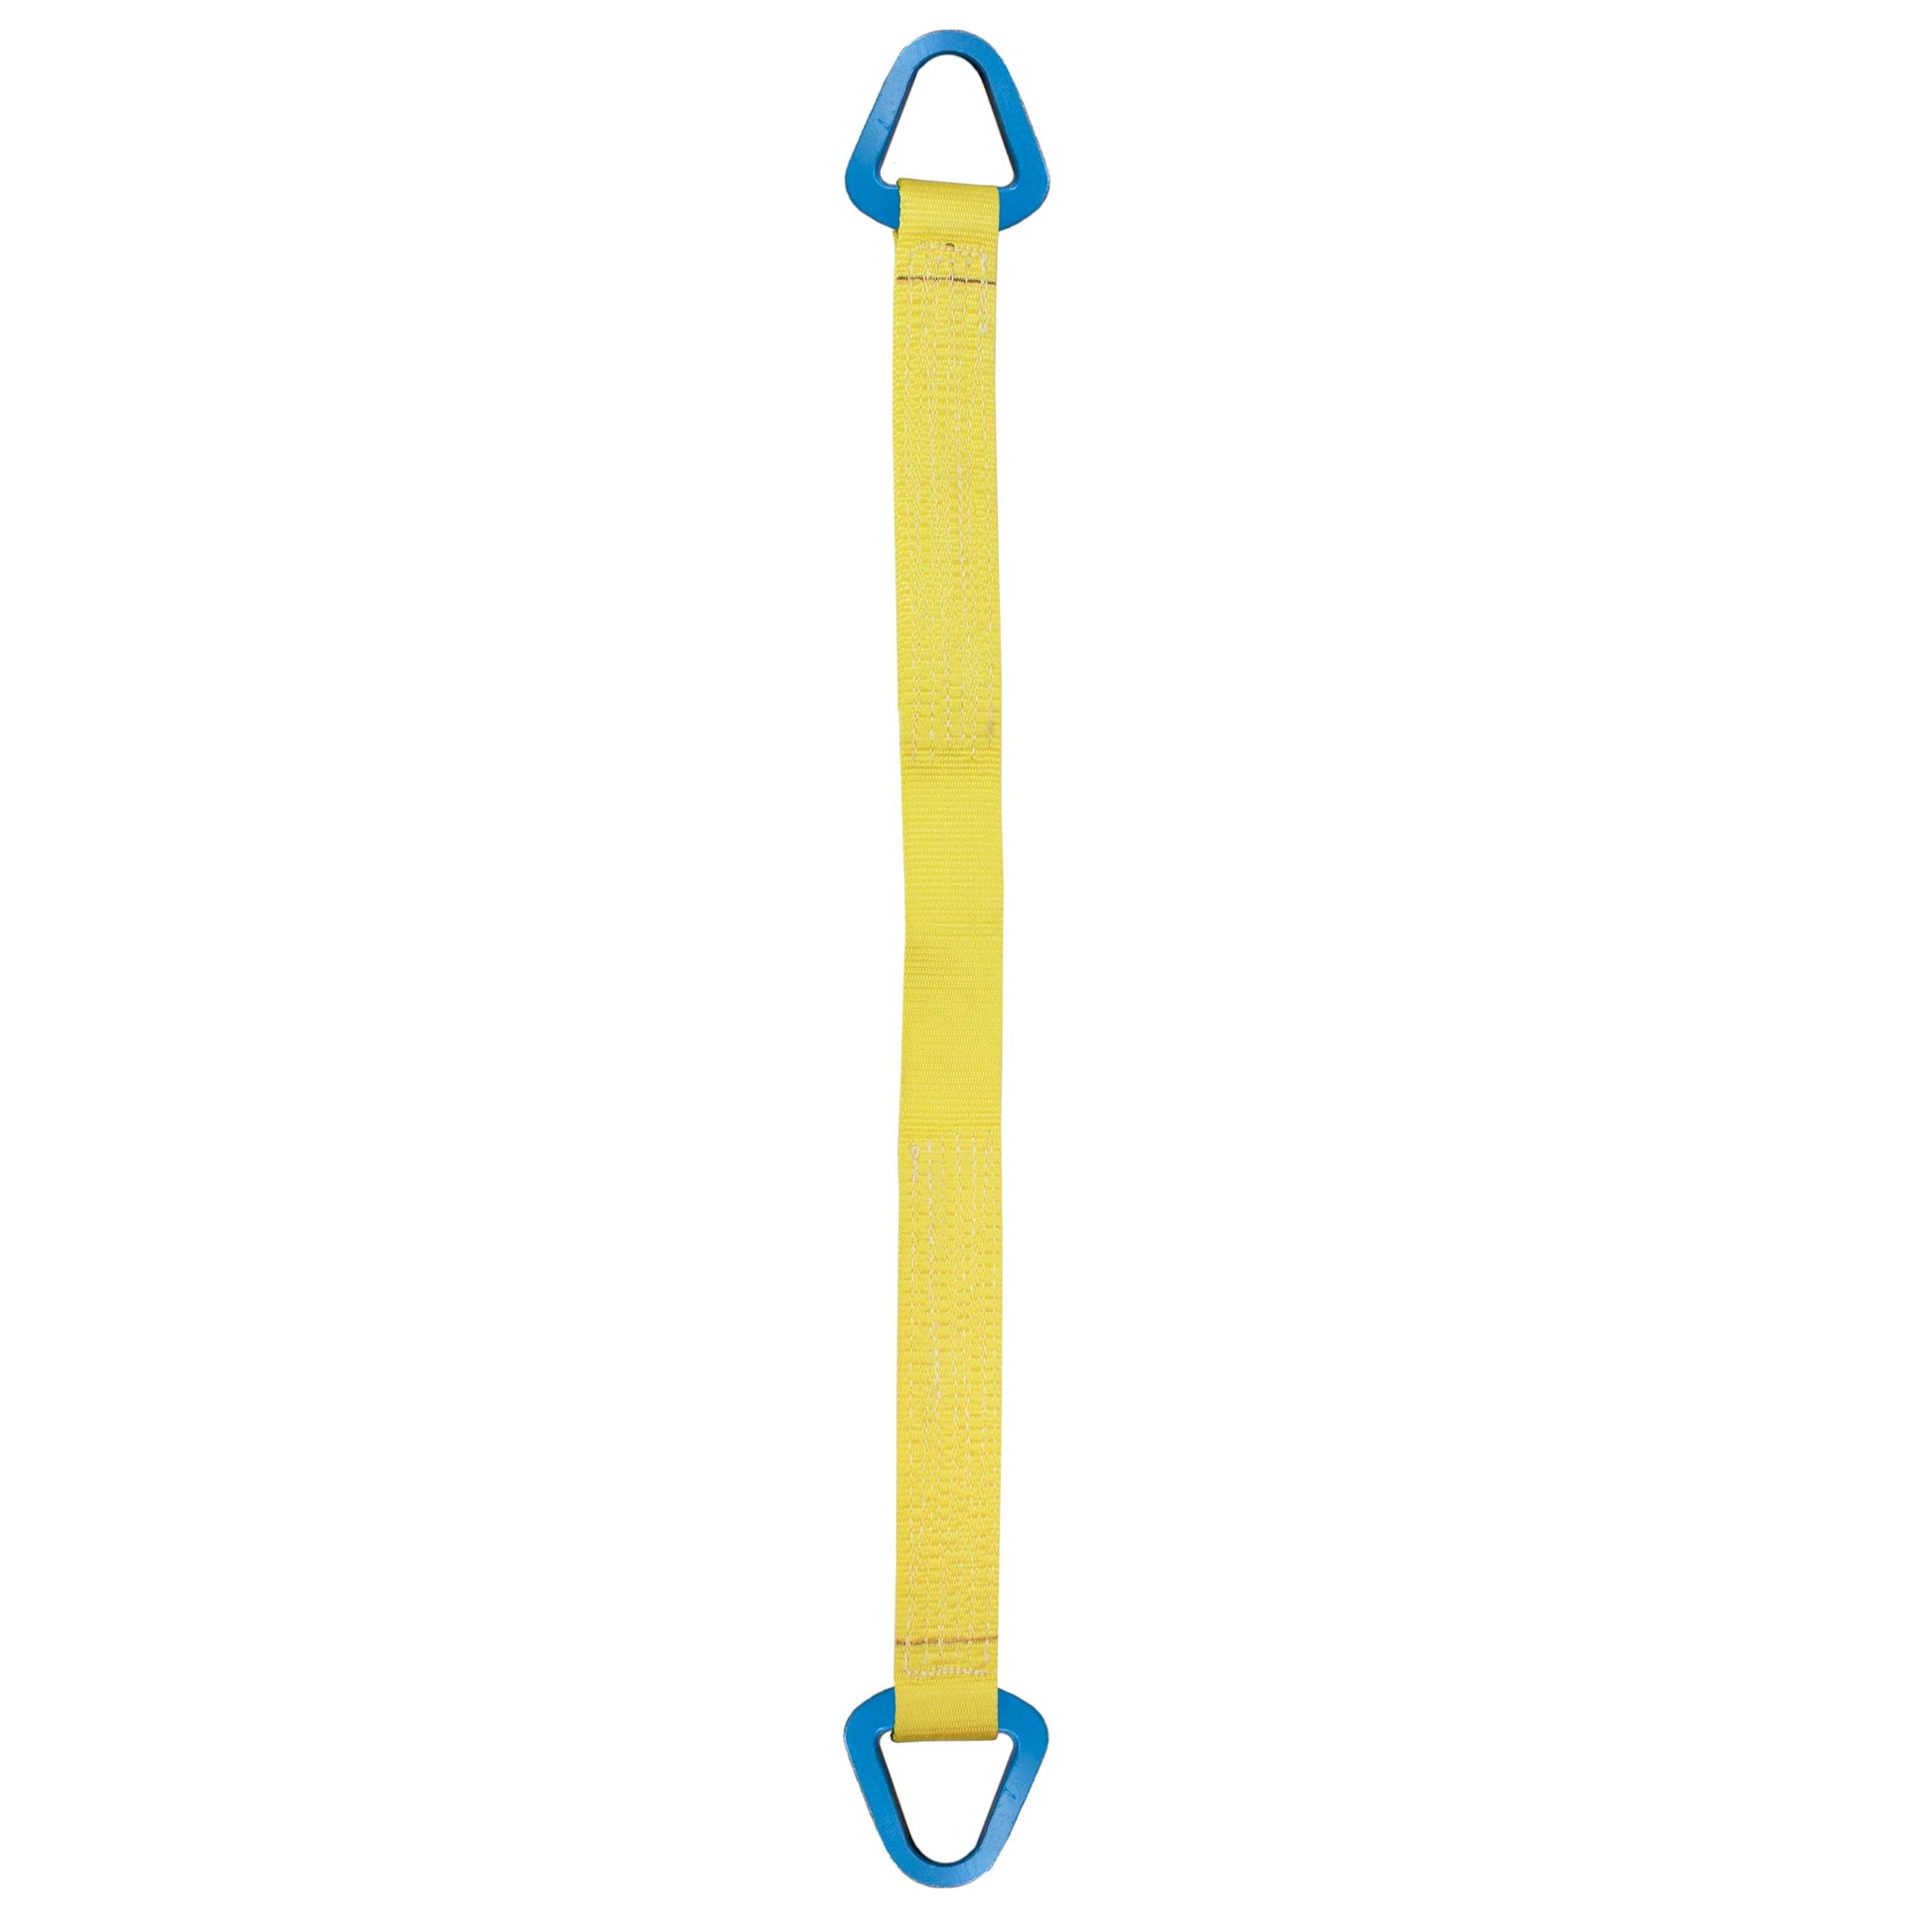 Nylon Lifting Sling Triangle 10 inch x 16 foot 2ply image 1 of 2